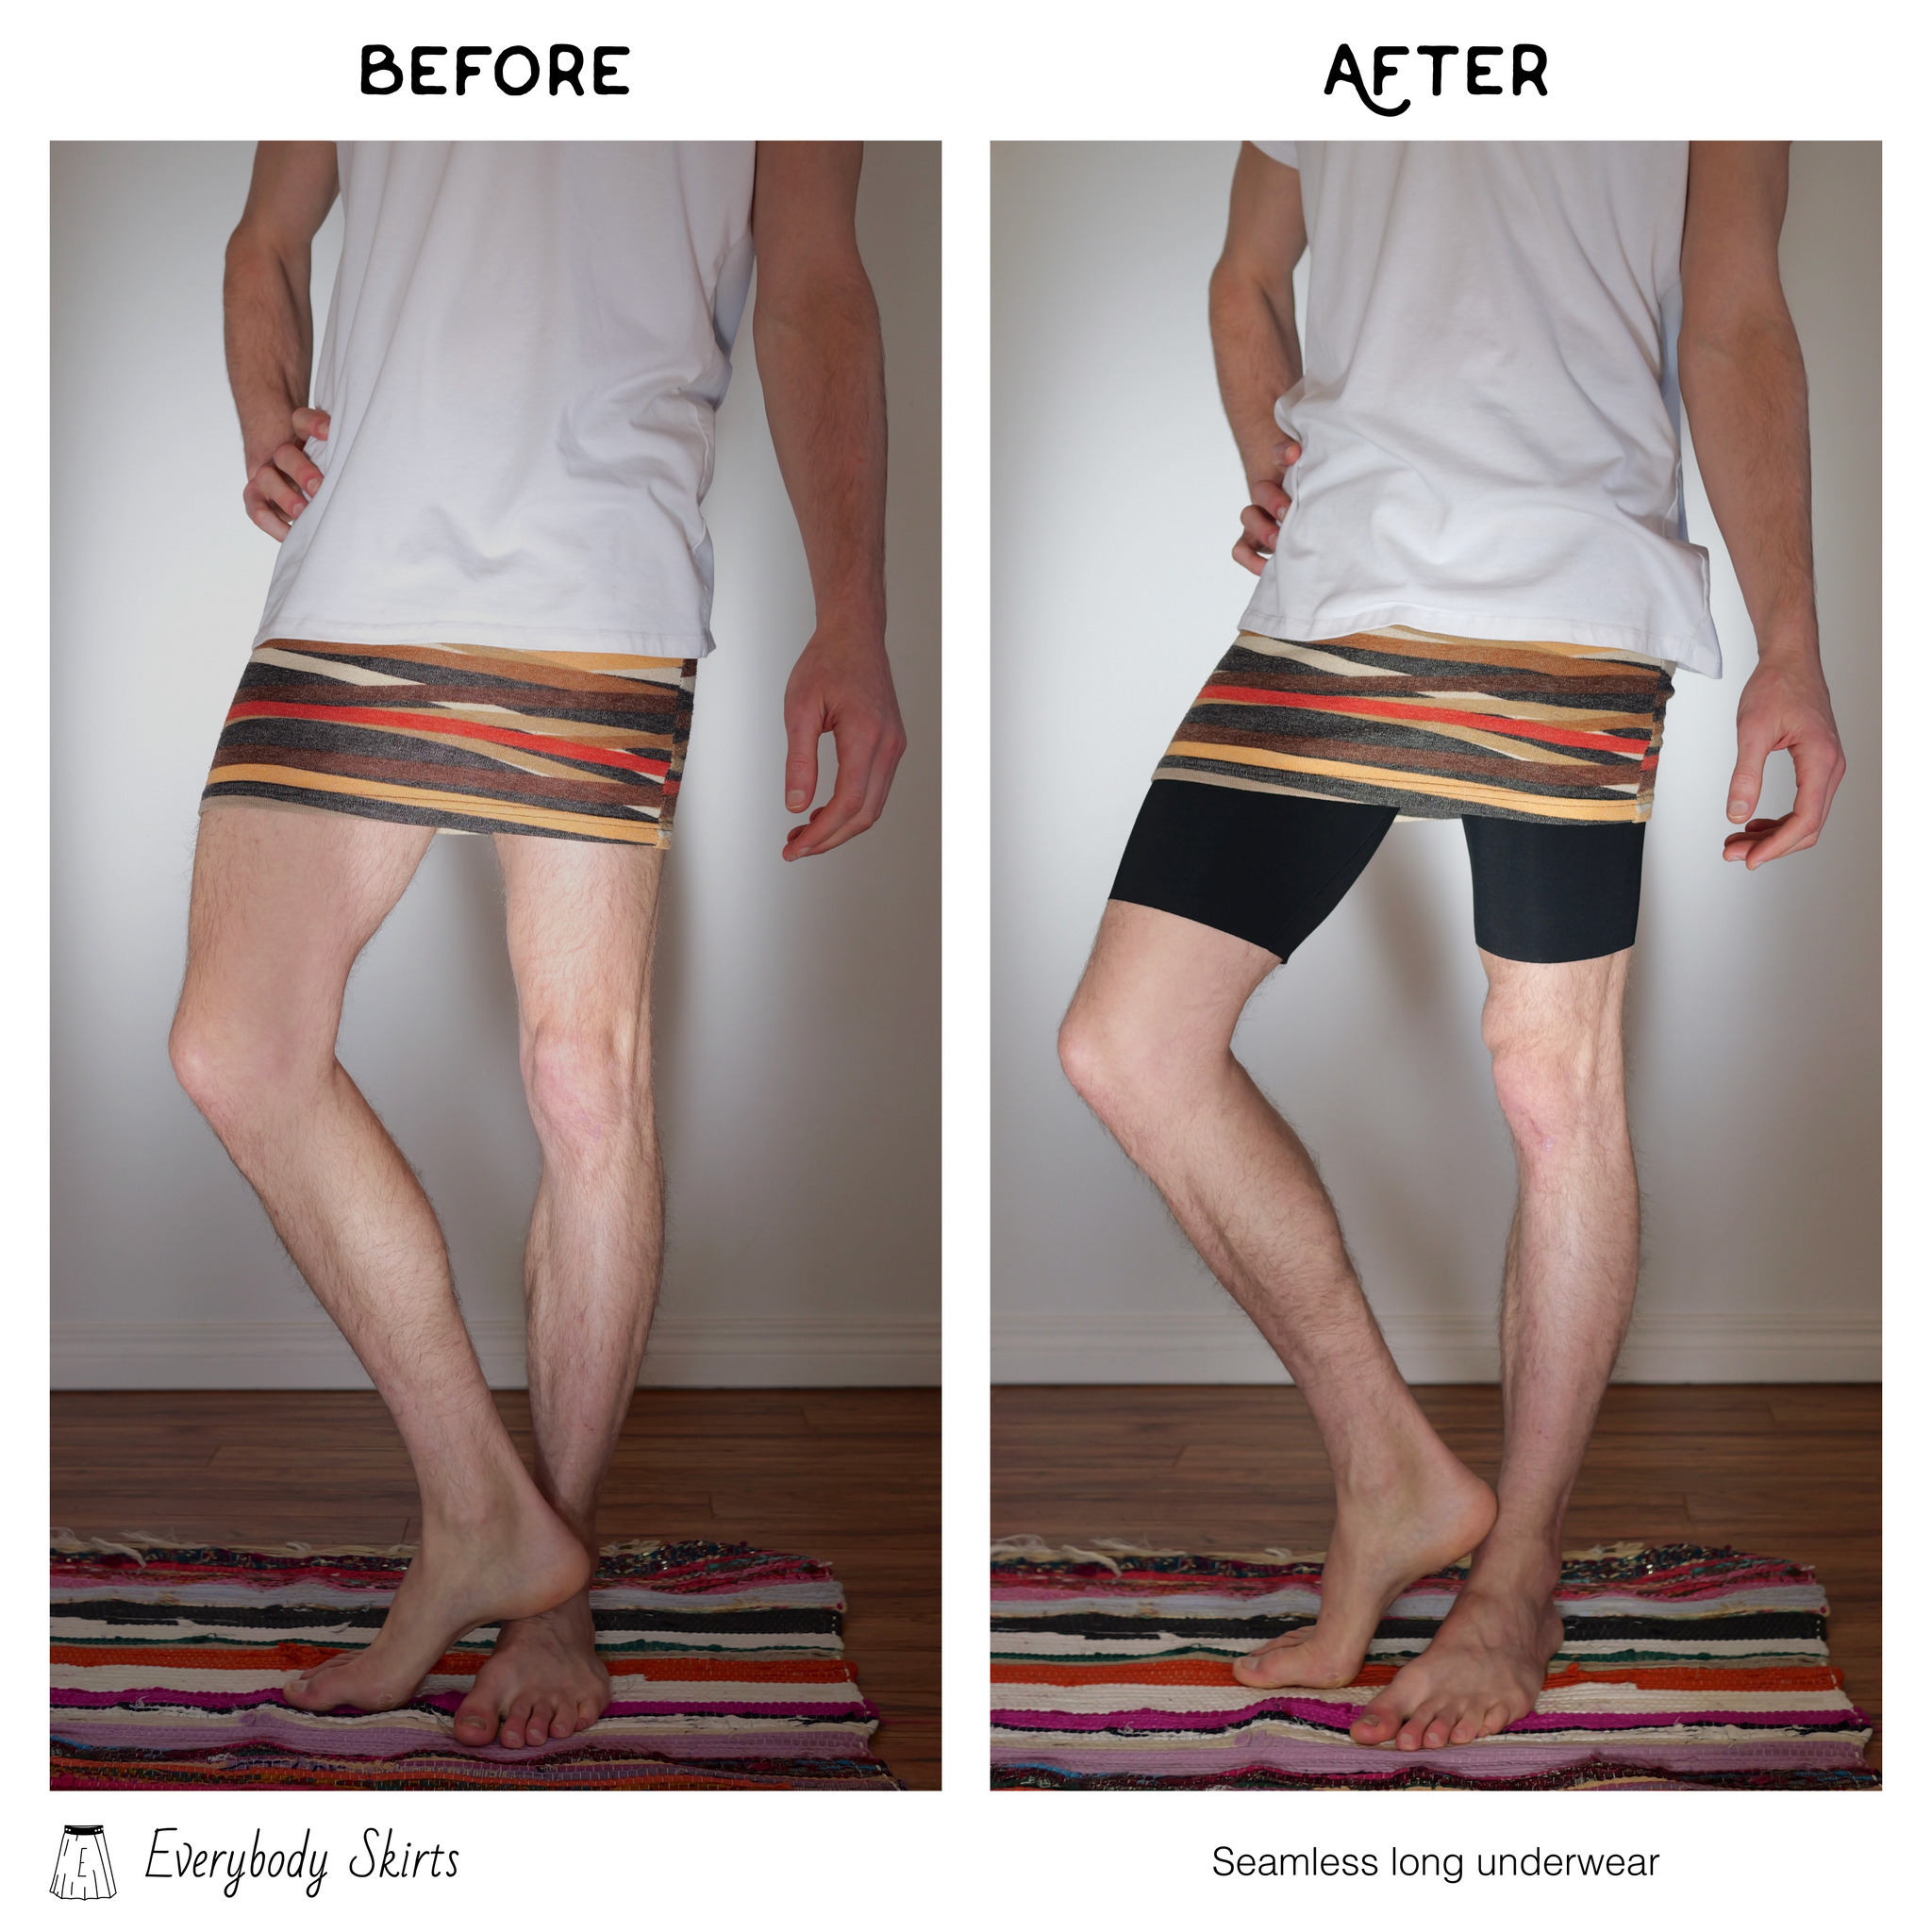 Before and after pictures of a male bodied individual with white shirt and yellow/red/orange/brown striped mini skirt. Bare legs in left shot, and long black seamless underwear in right shot.